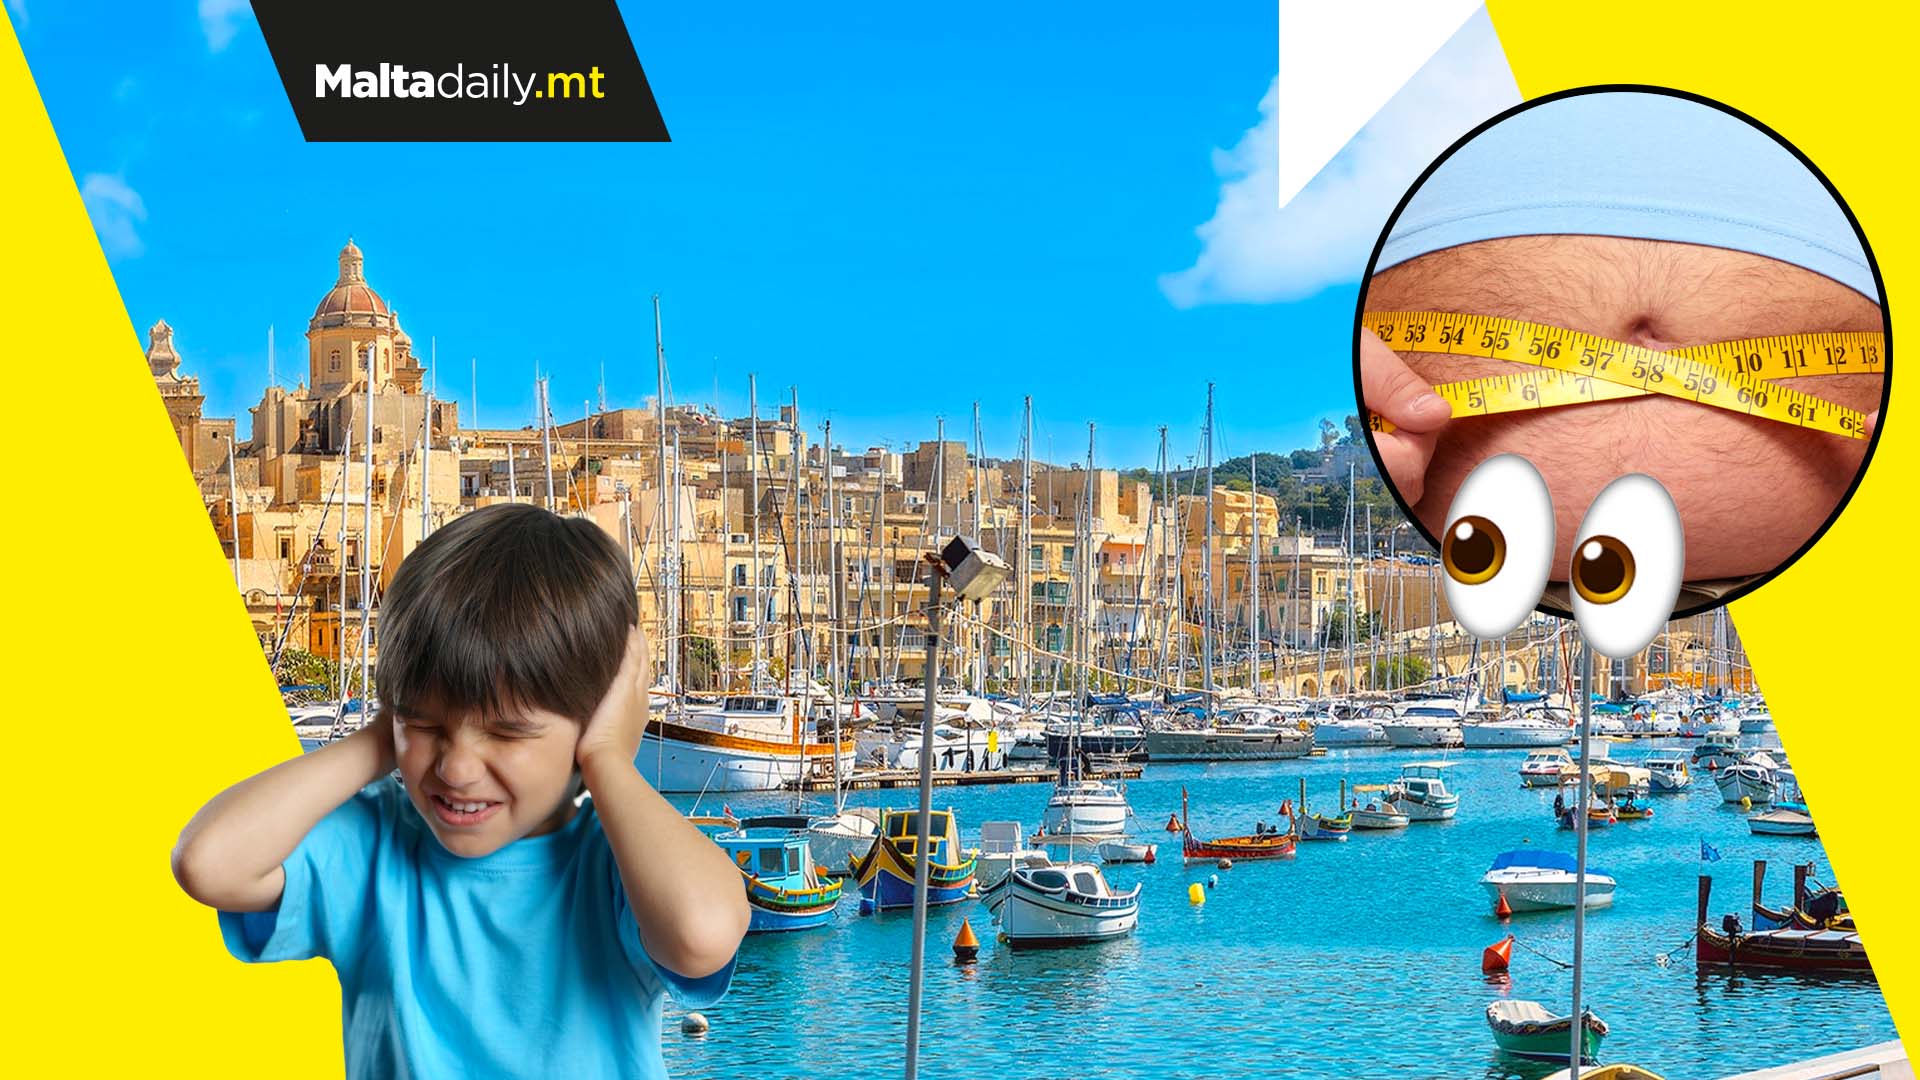 Malta is the EU’s most noise polluting and most obese country